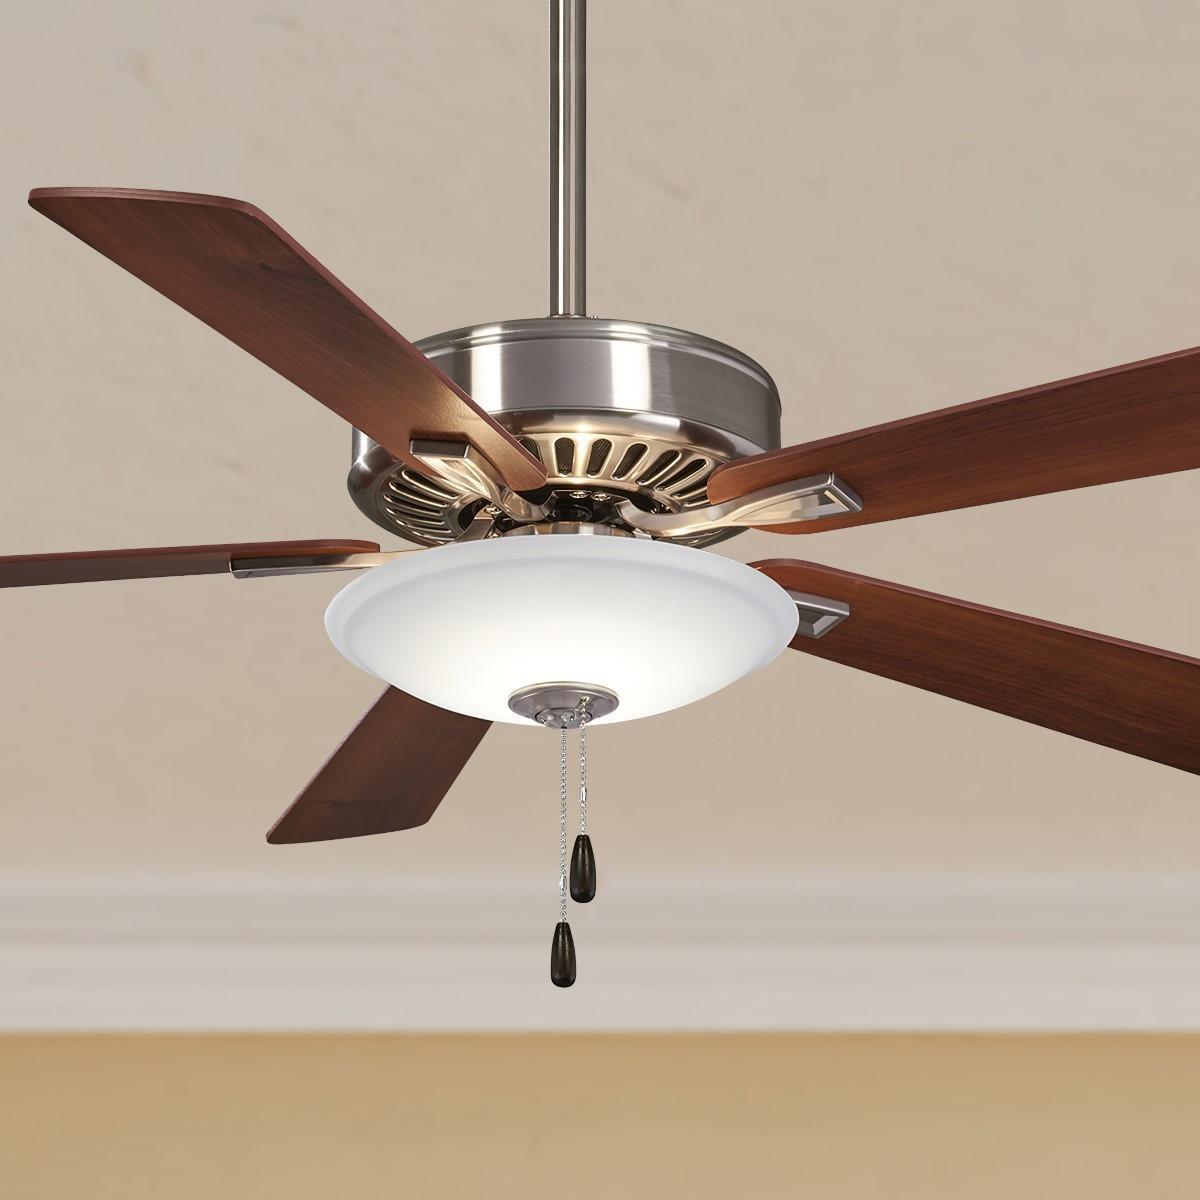 Contractor Uni-Pack LED 52 Inch Ceiling Fan With Light